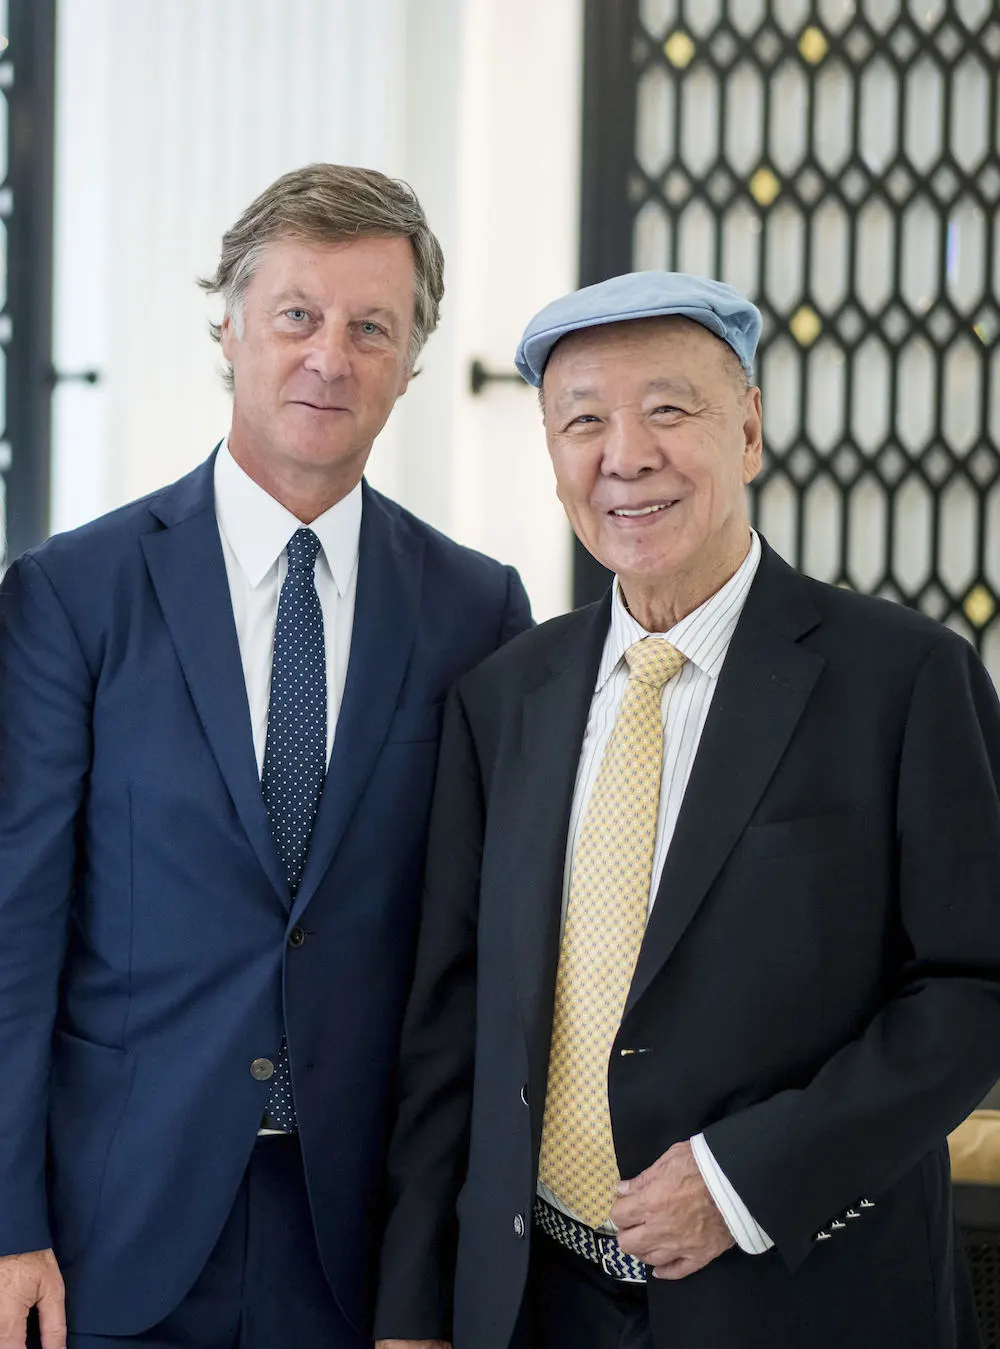 Mr. Sébastien Bazin, Chairman and CEO of Accor meets with Dr. Lui Che Woo, Chairman of GEG